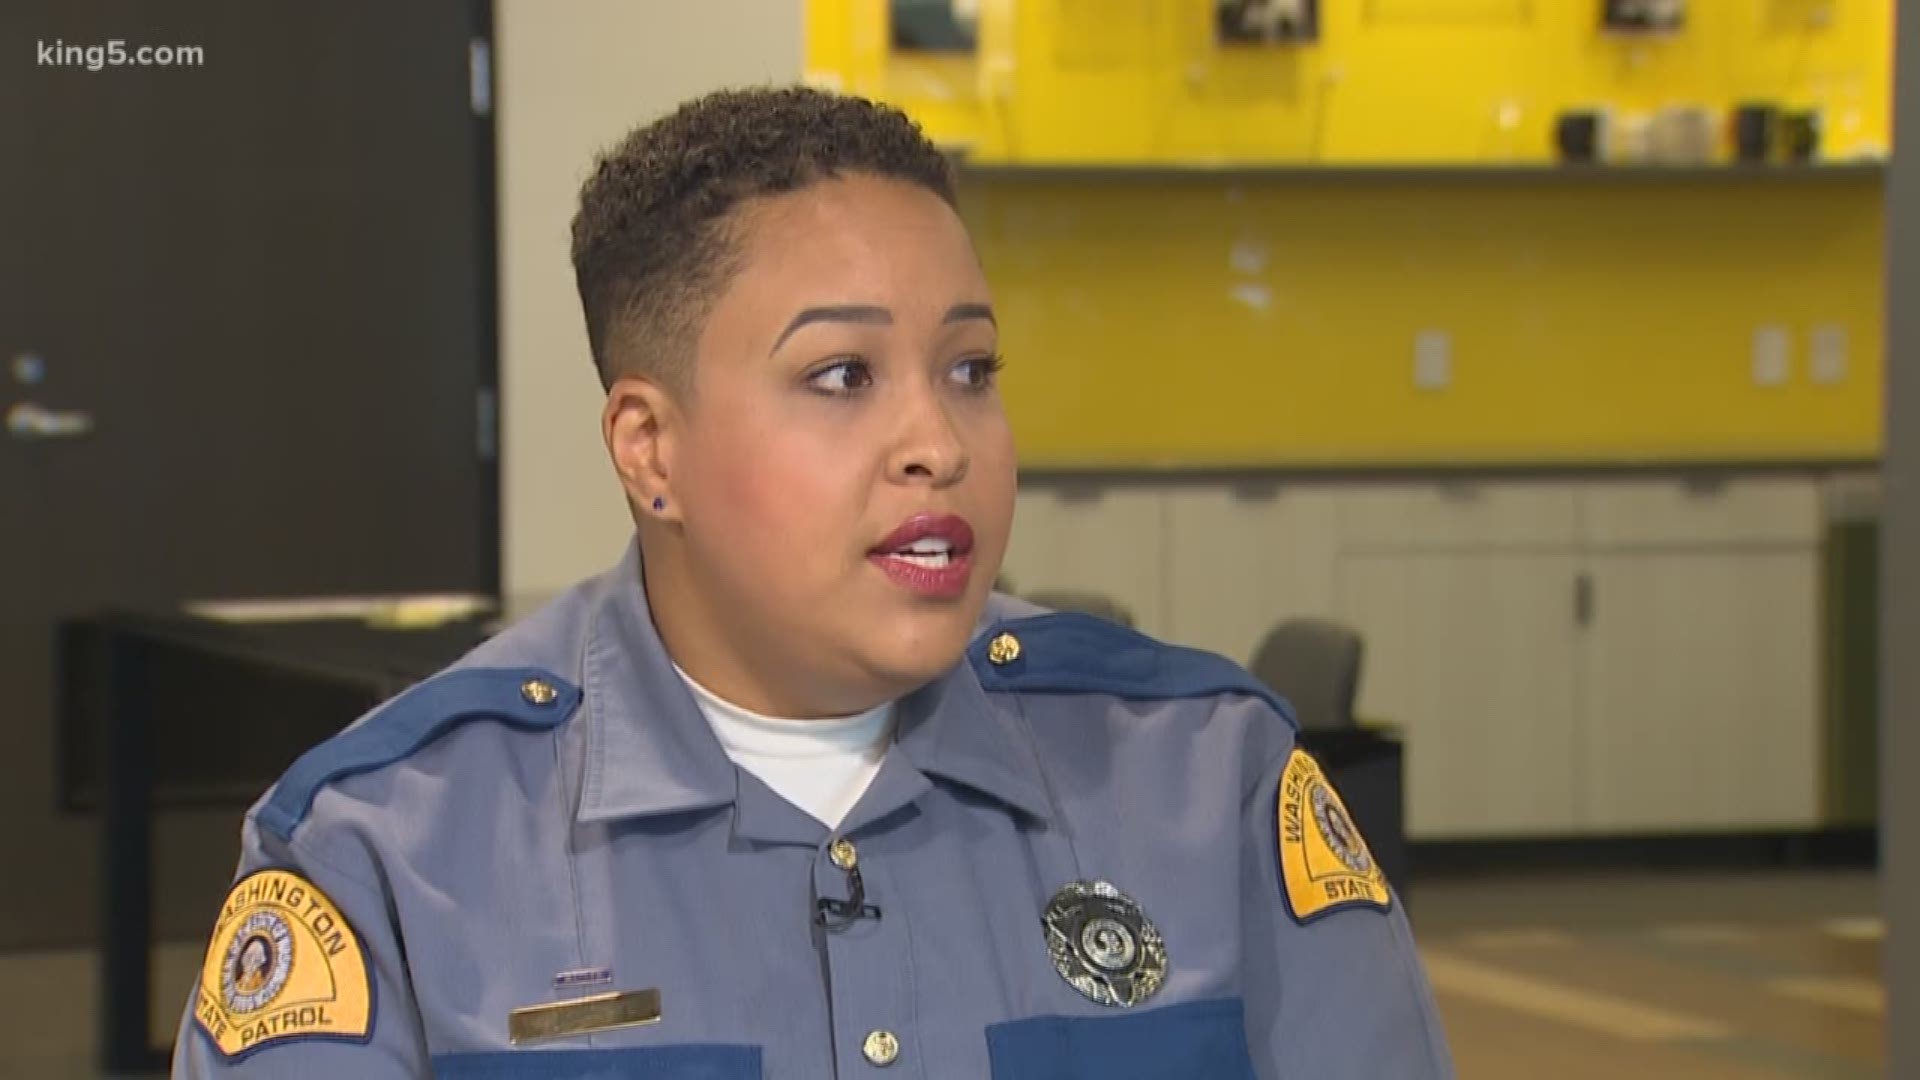 Washington State Trooper answers KING 5 viewer questions like when to pull over for emergency vehicles, license plate laws, and speed limit confusion.